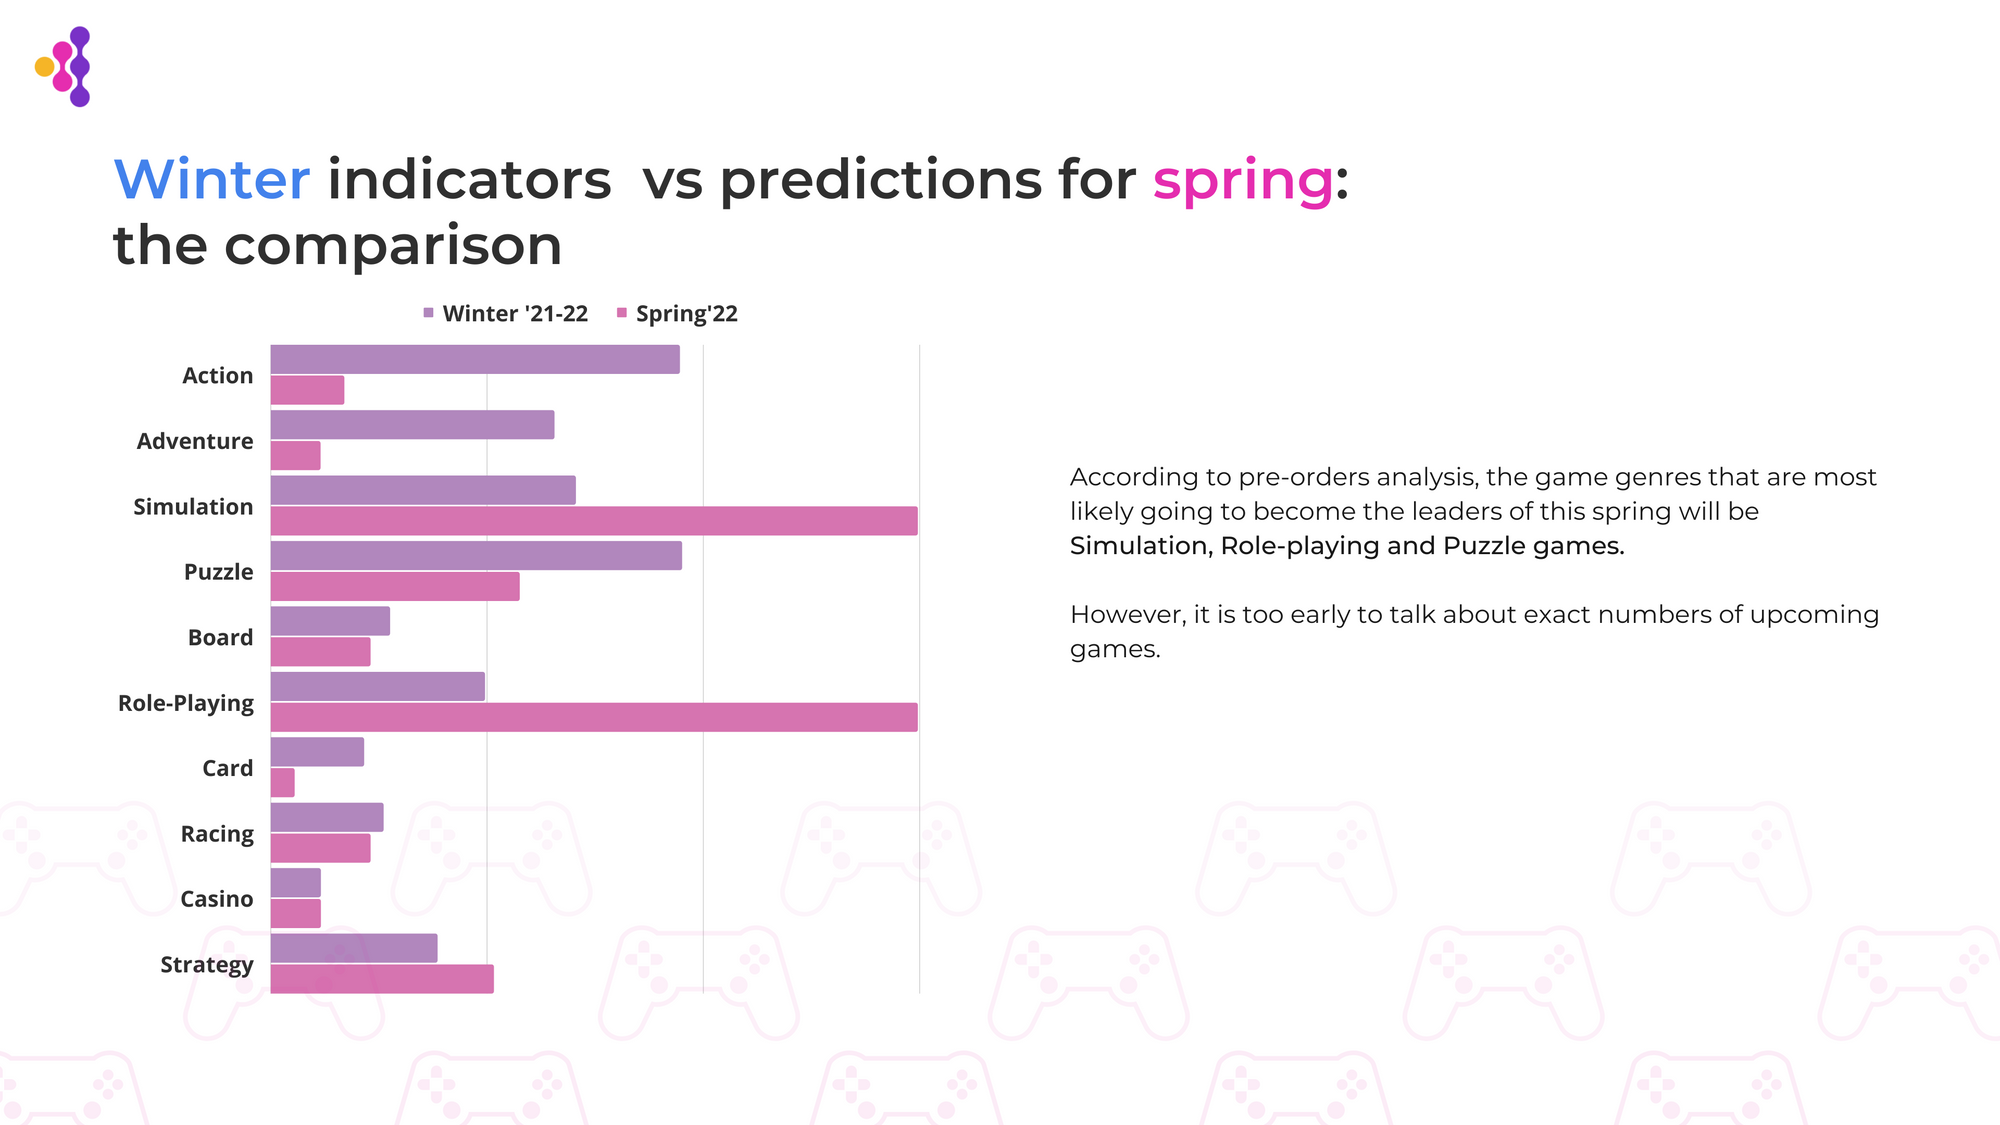 See which game categories are expected to come out on top this spring